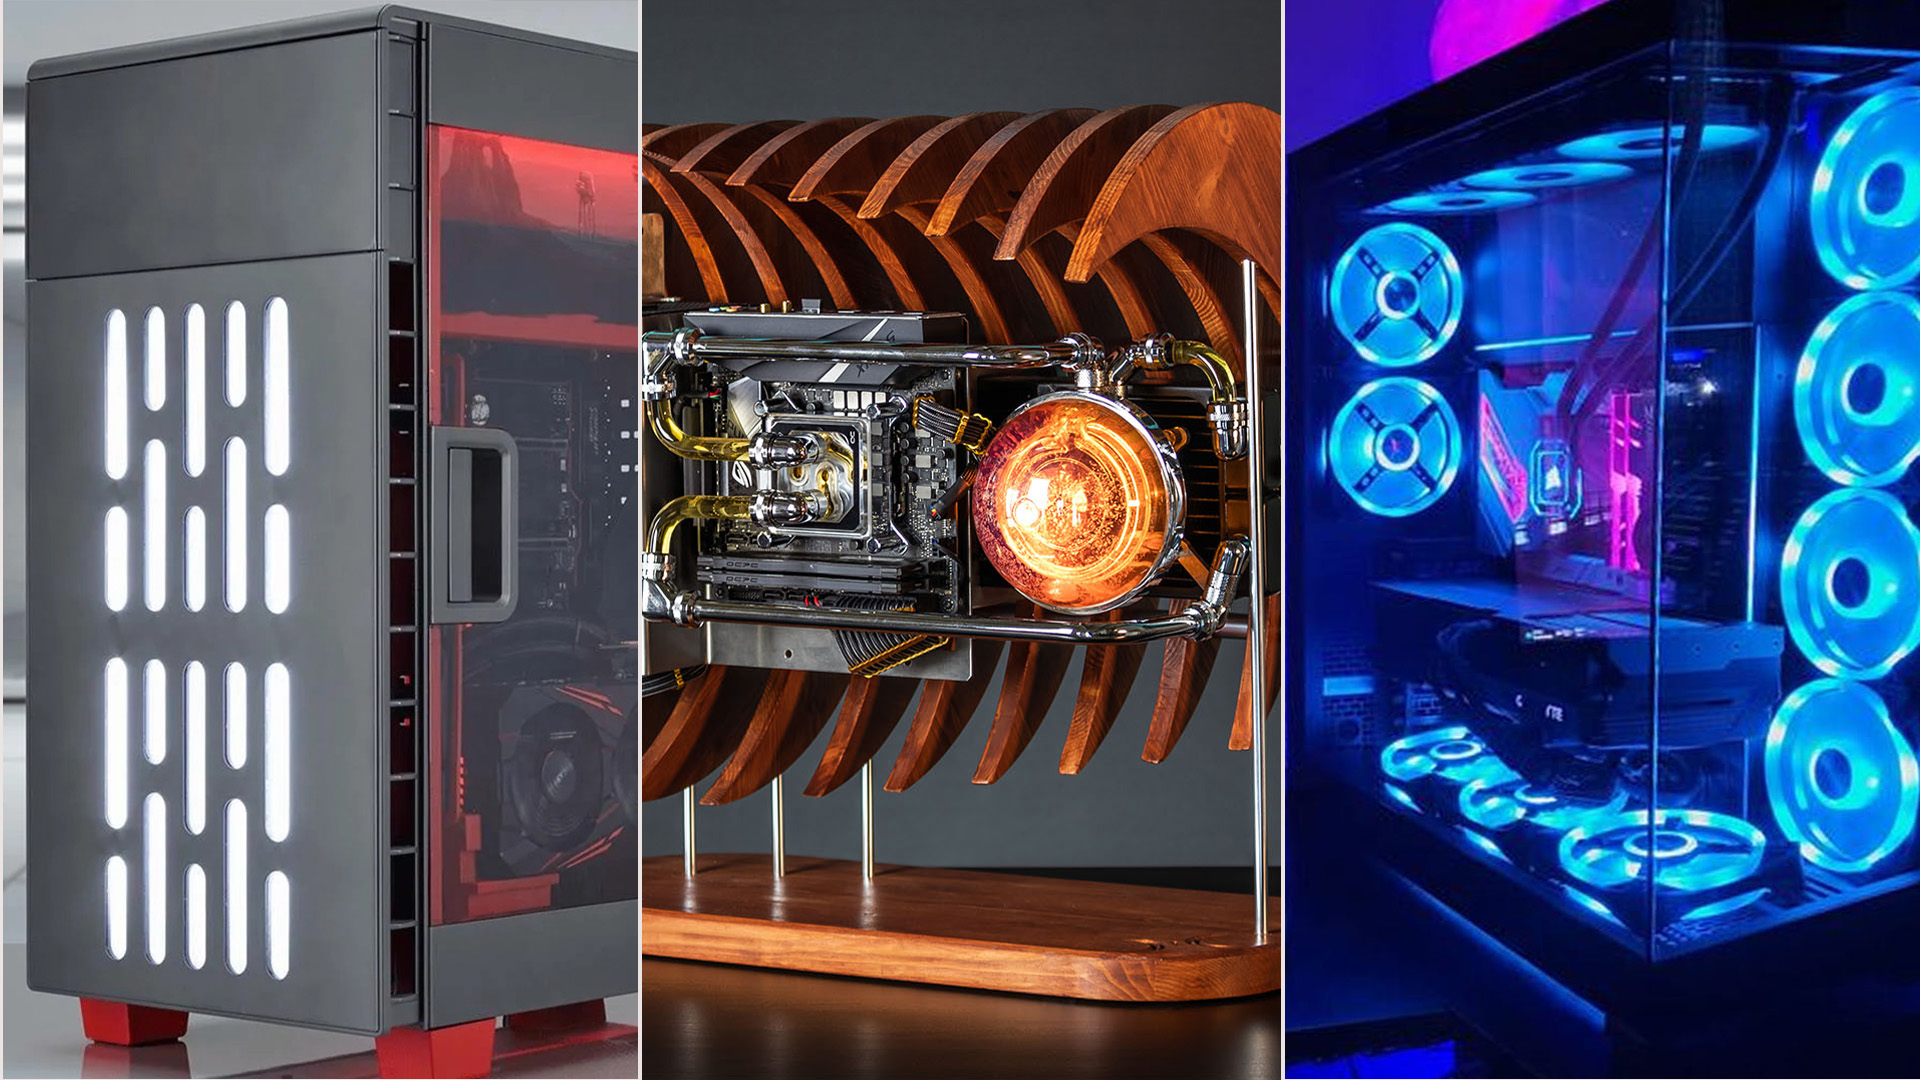 Best PC builds, mods, gaming setups and game rooms